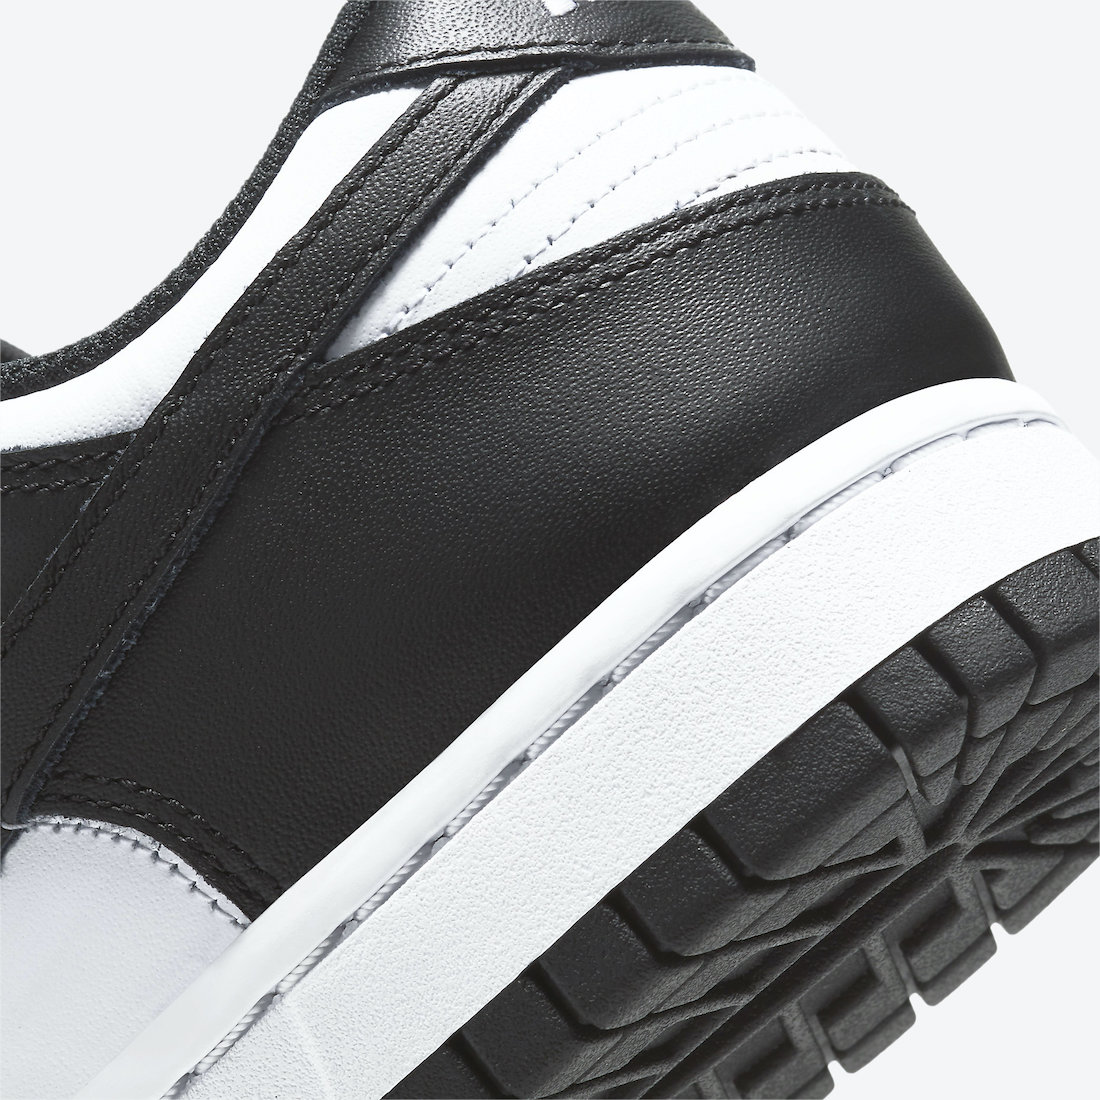 Nike Dunk Low White Black DD1503-101 Release Date Price